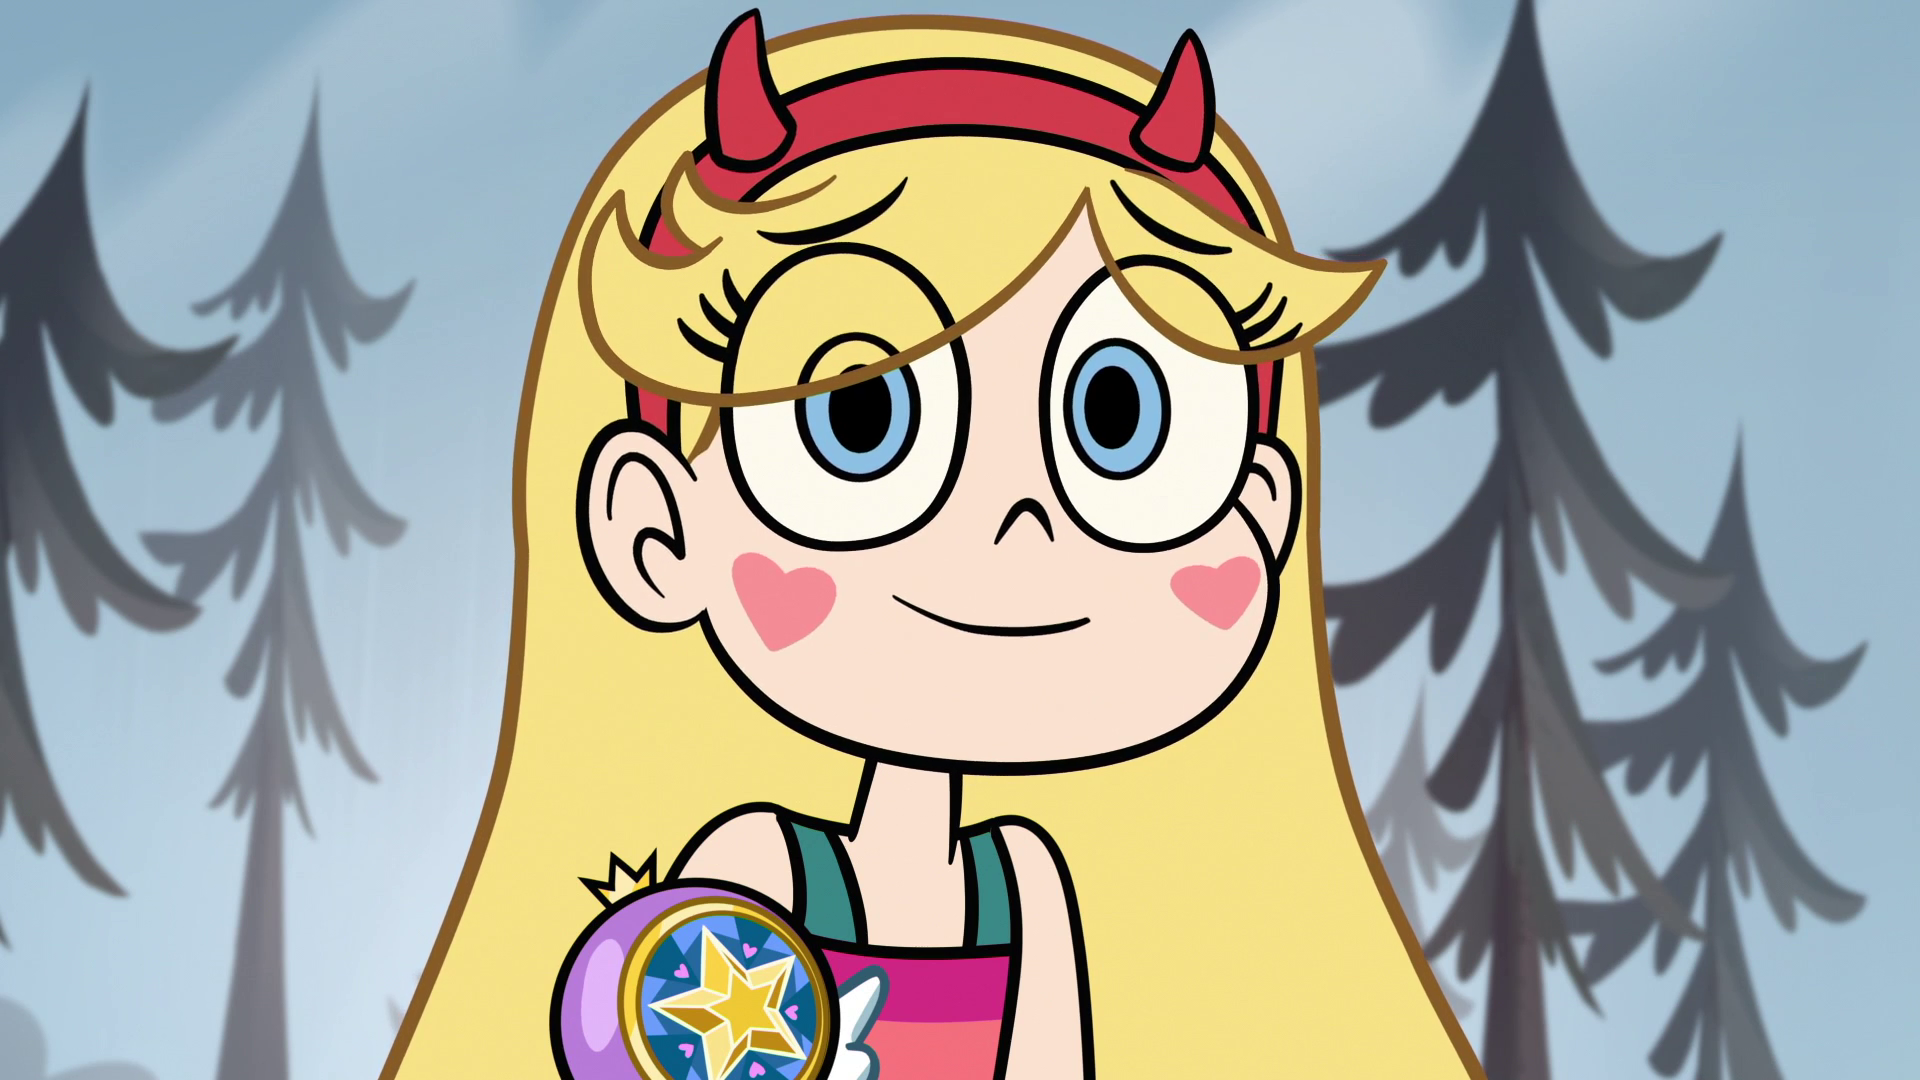 star vs the forces of evil wallpaper hd,cartoon,animated cartoon,illustration,fiction,fictional character